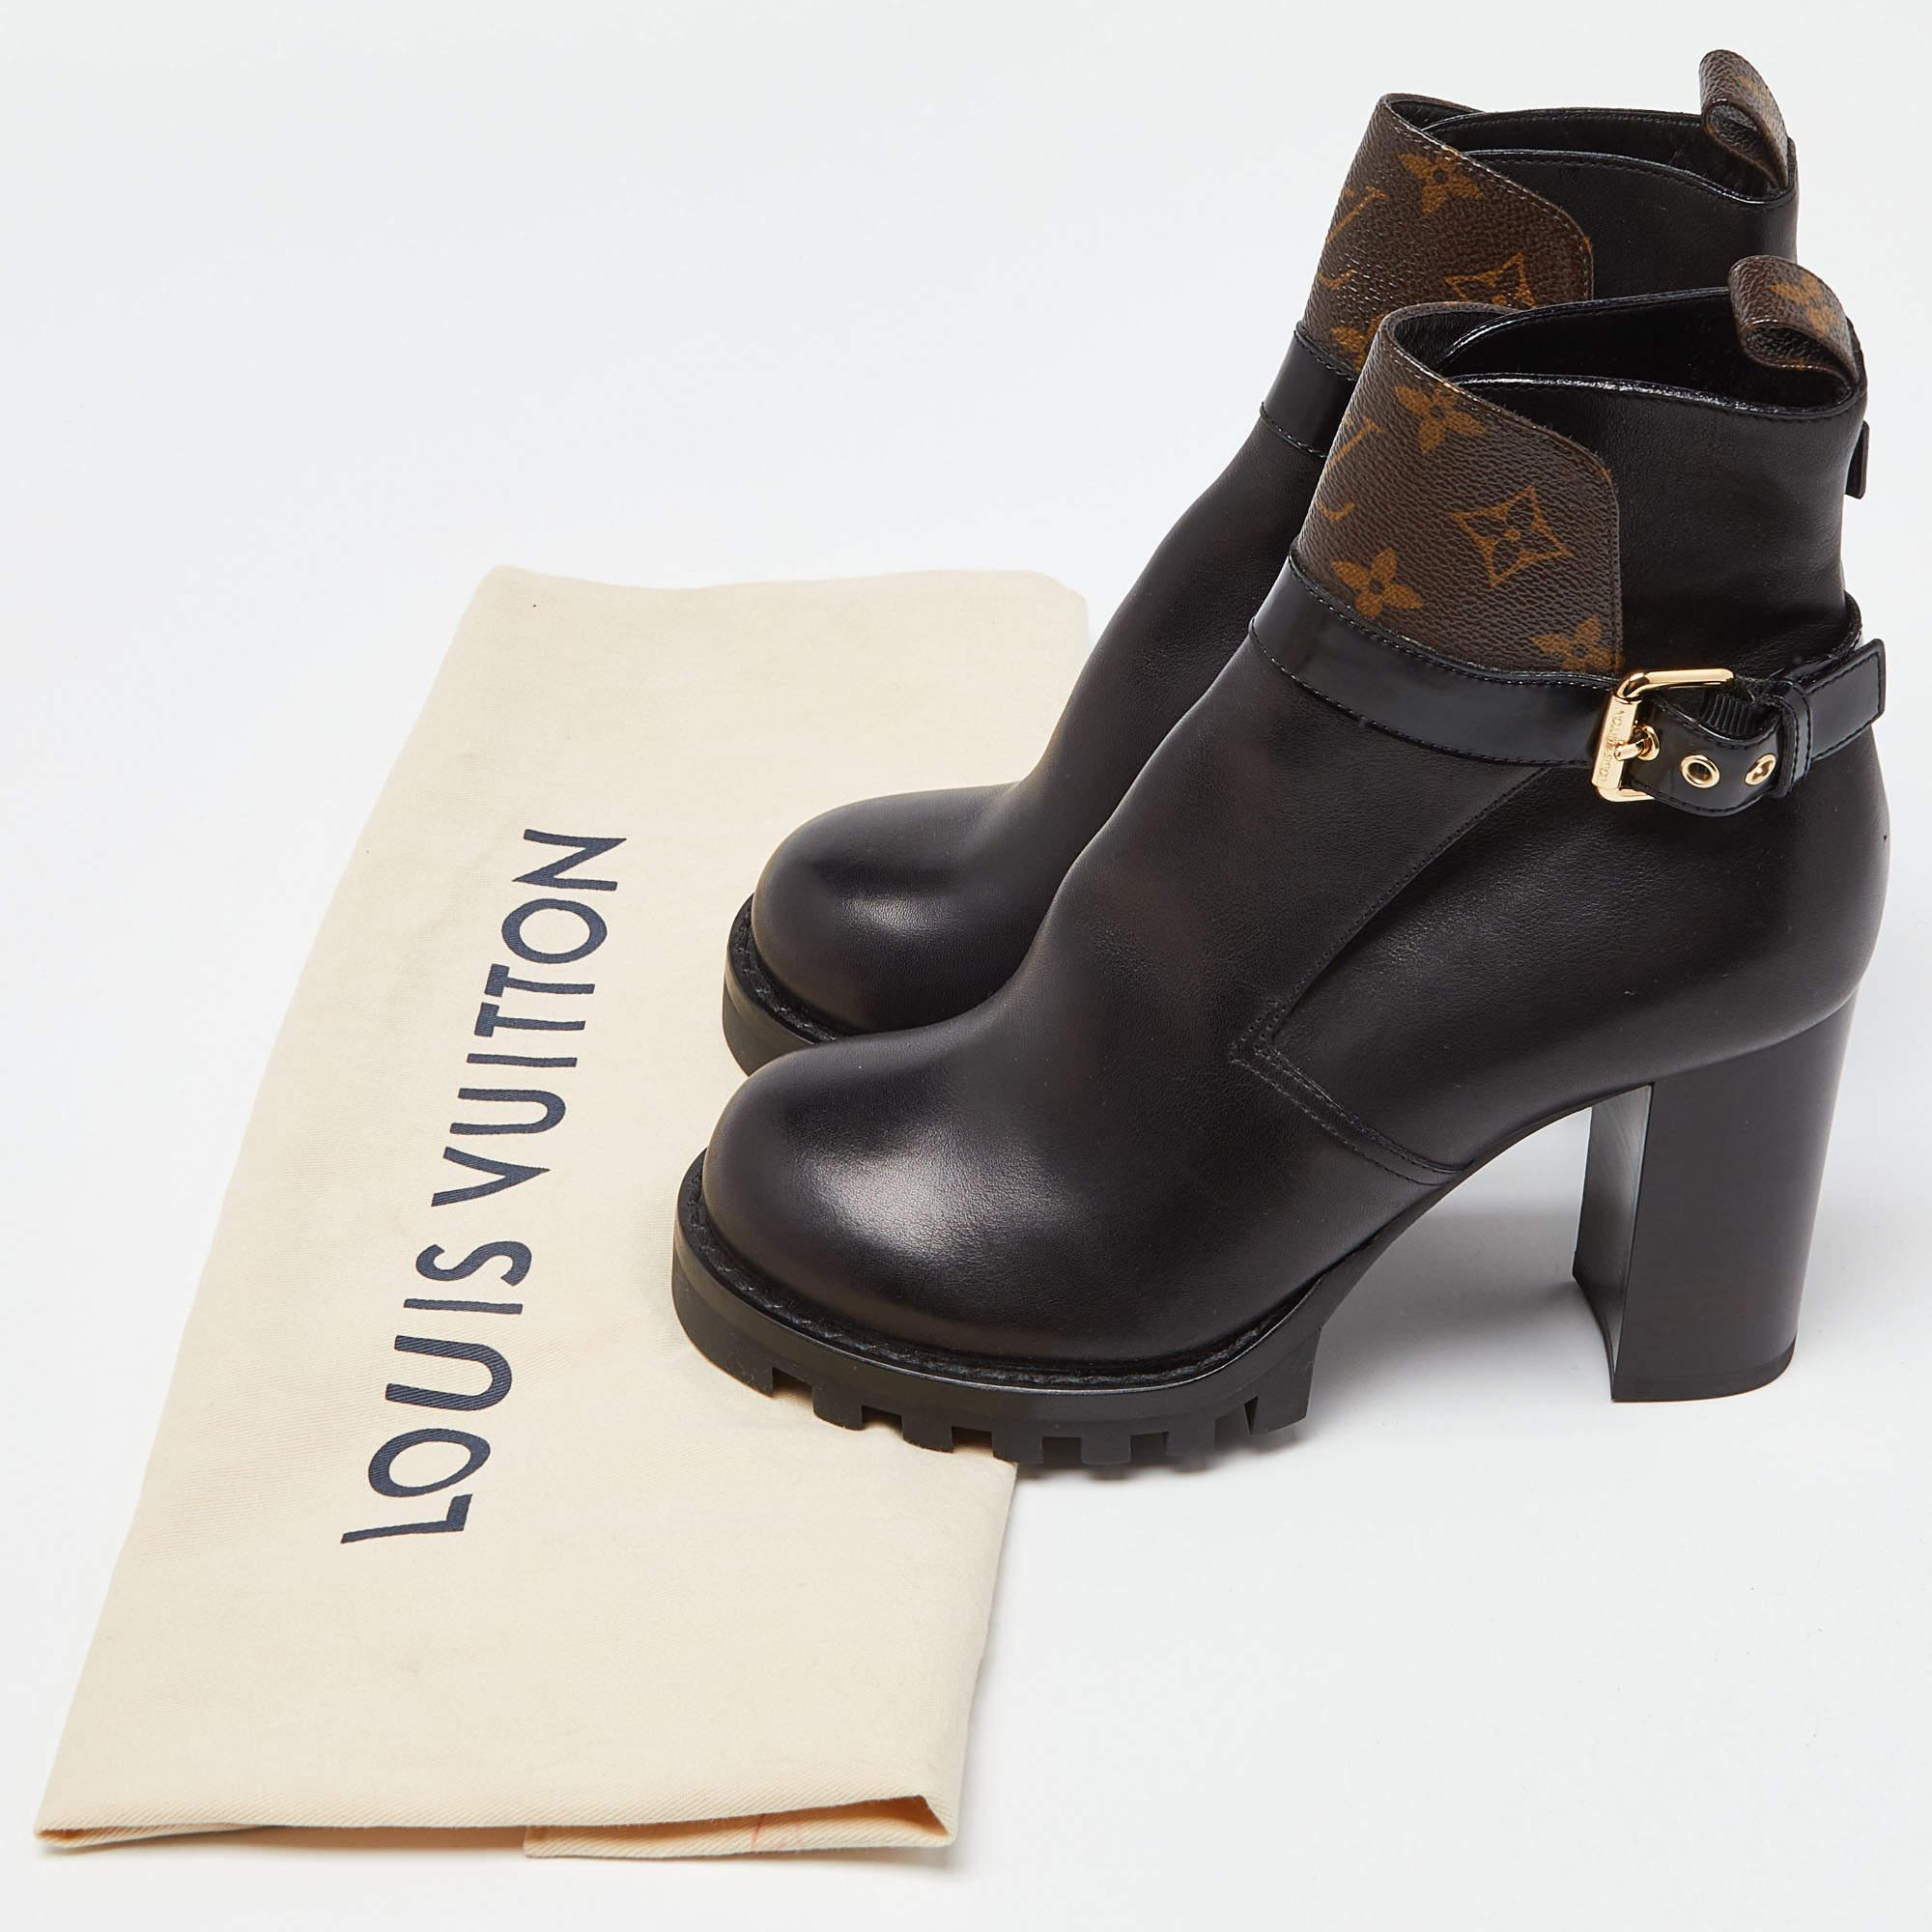 Louis Vuitton Black/Brown Monogram Canvas and Leather Ankle Length Boots Size 39 For Sale 5